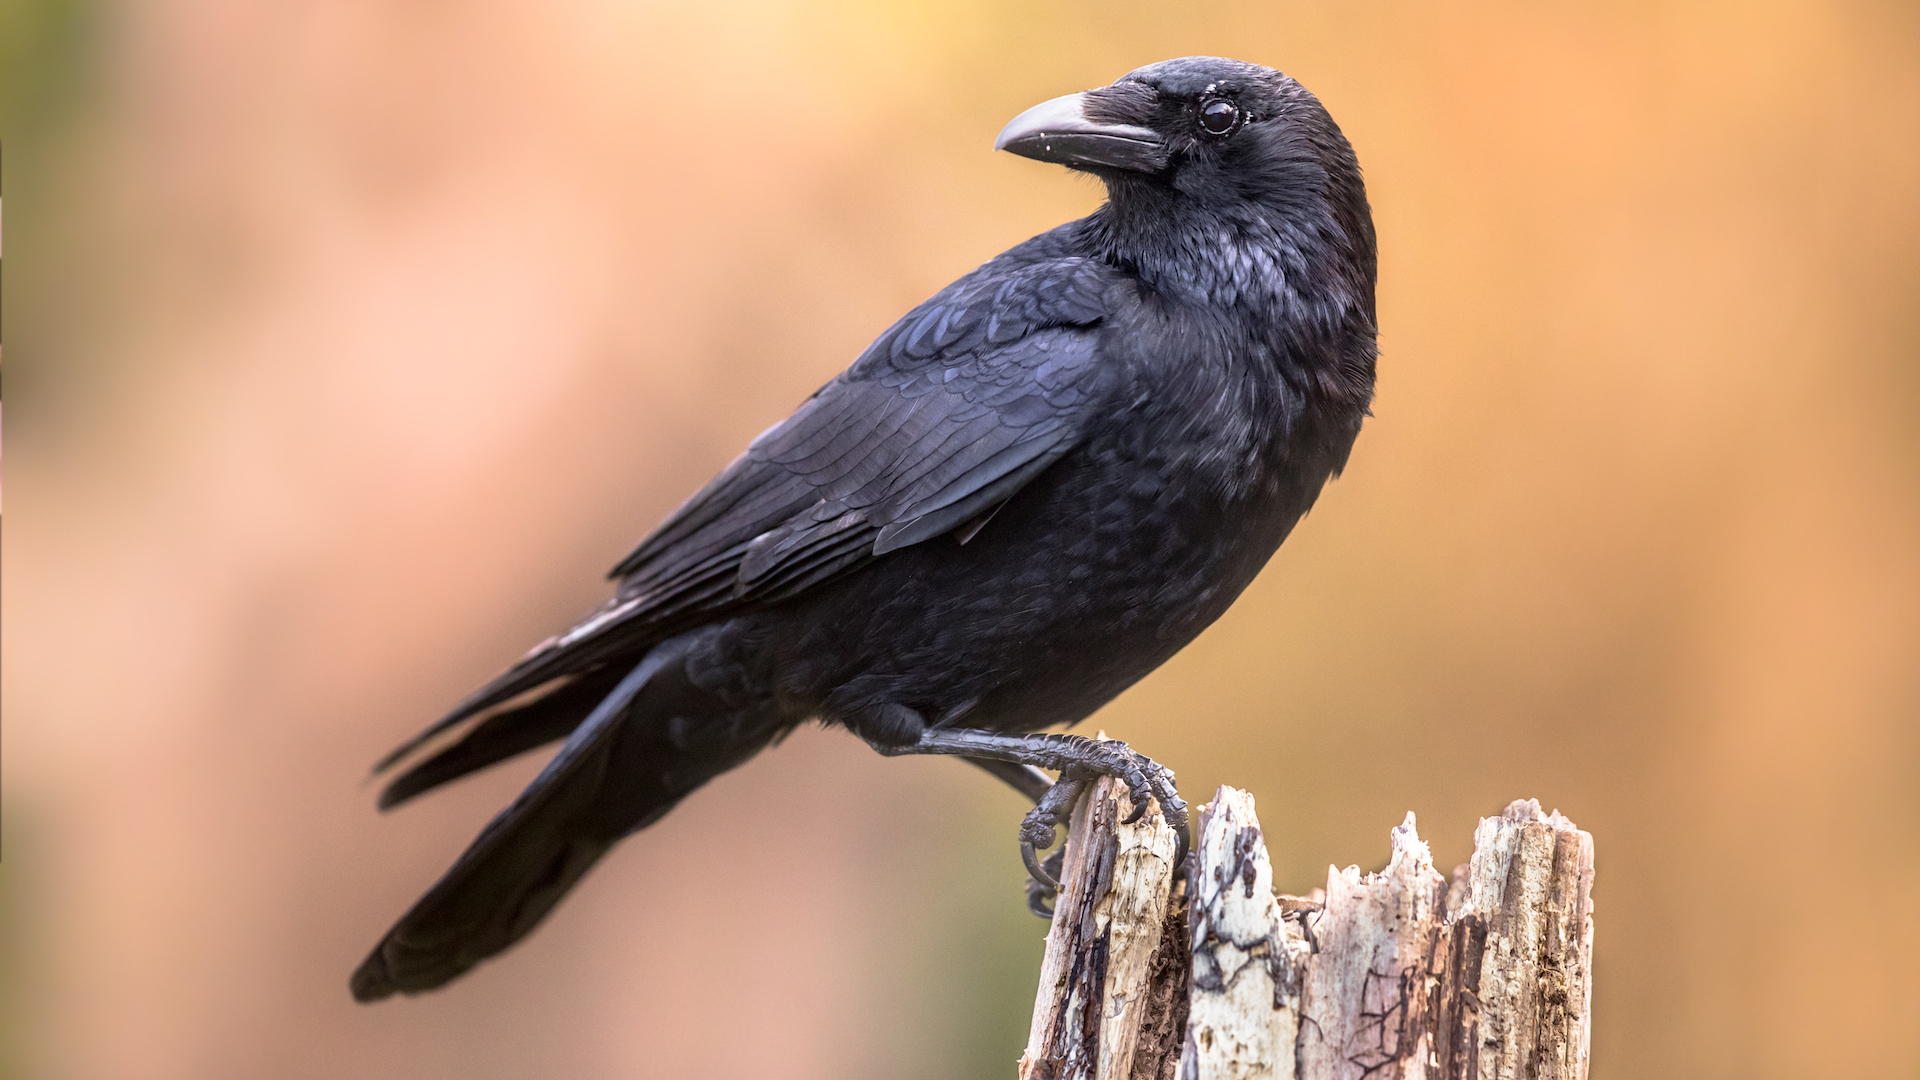 Crows can count out loud, startling study reveals